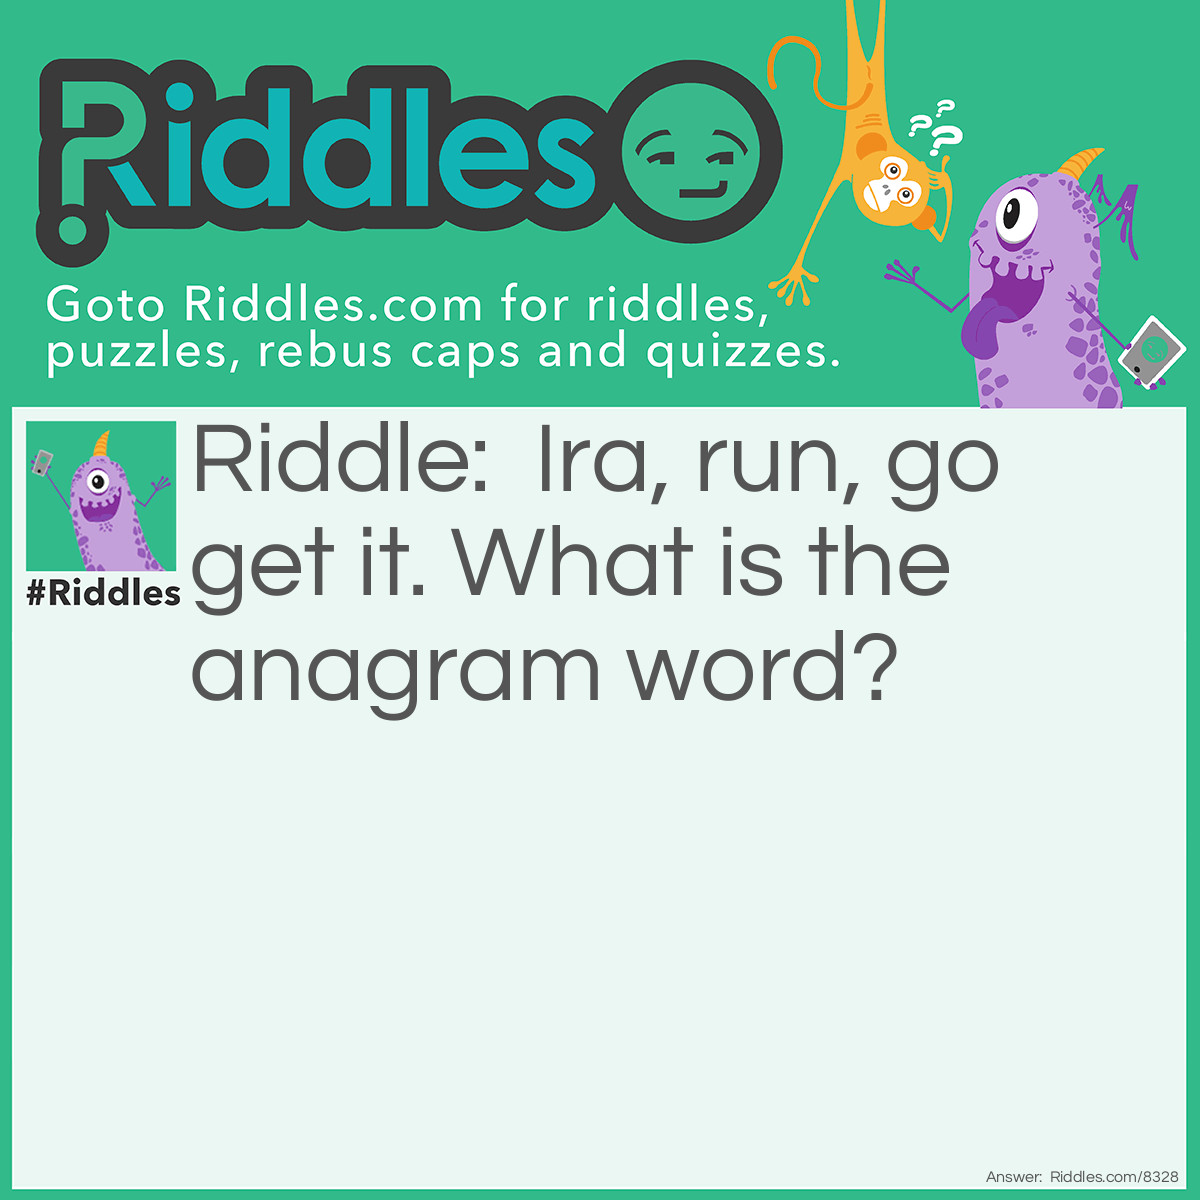 Riddle: Ira, run, go get it. What is the anagrammed word? Answer: Regurgitation.